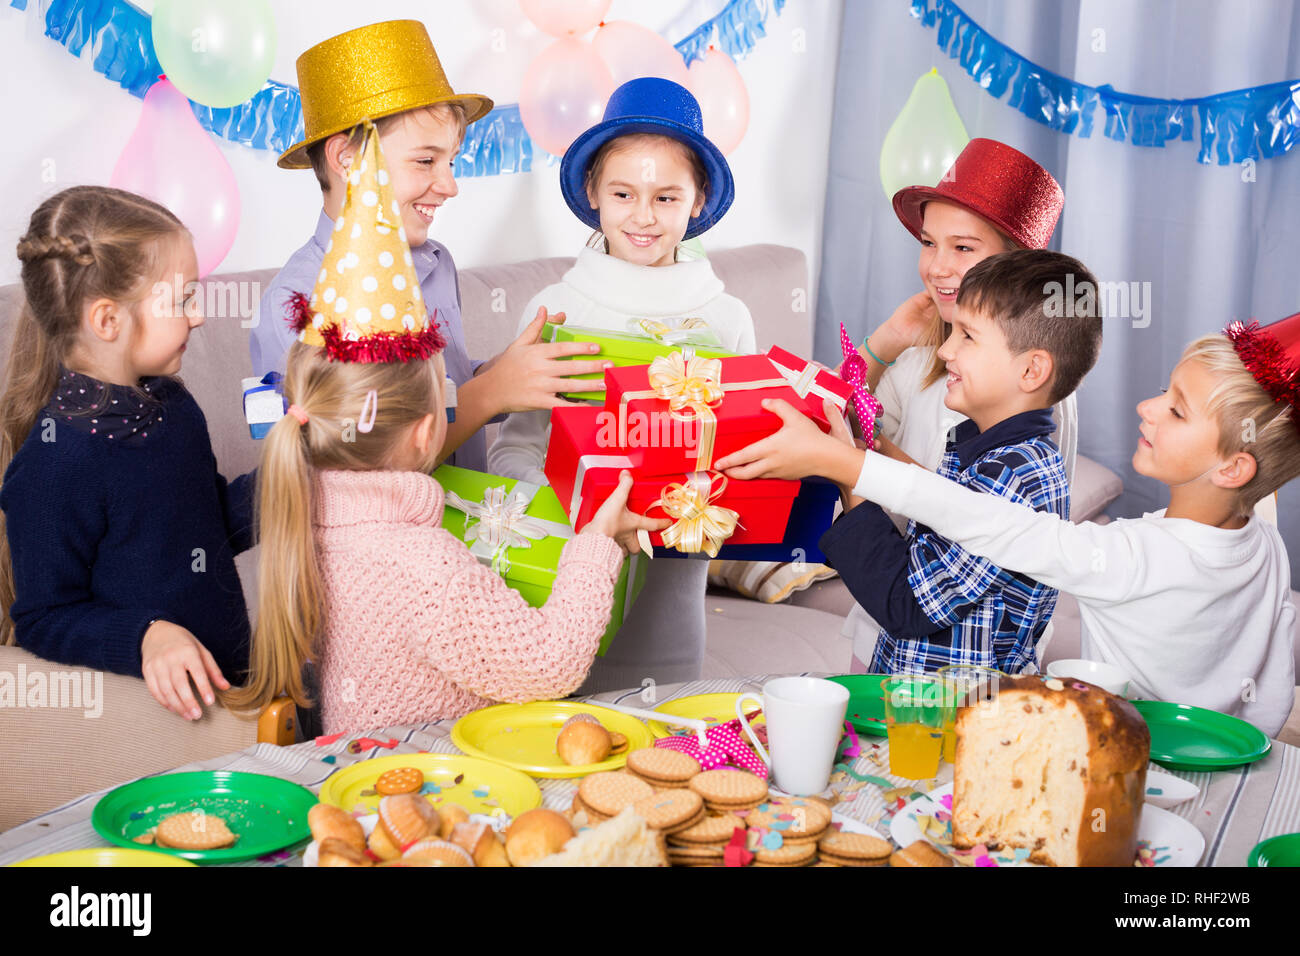 Satisfied children presenting gifts to girl during birthday party Stock ...